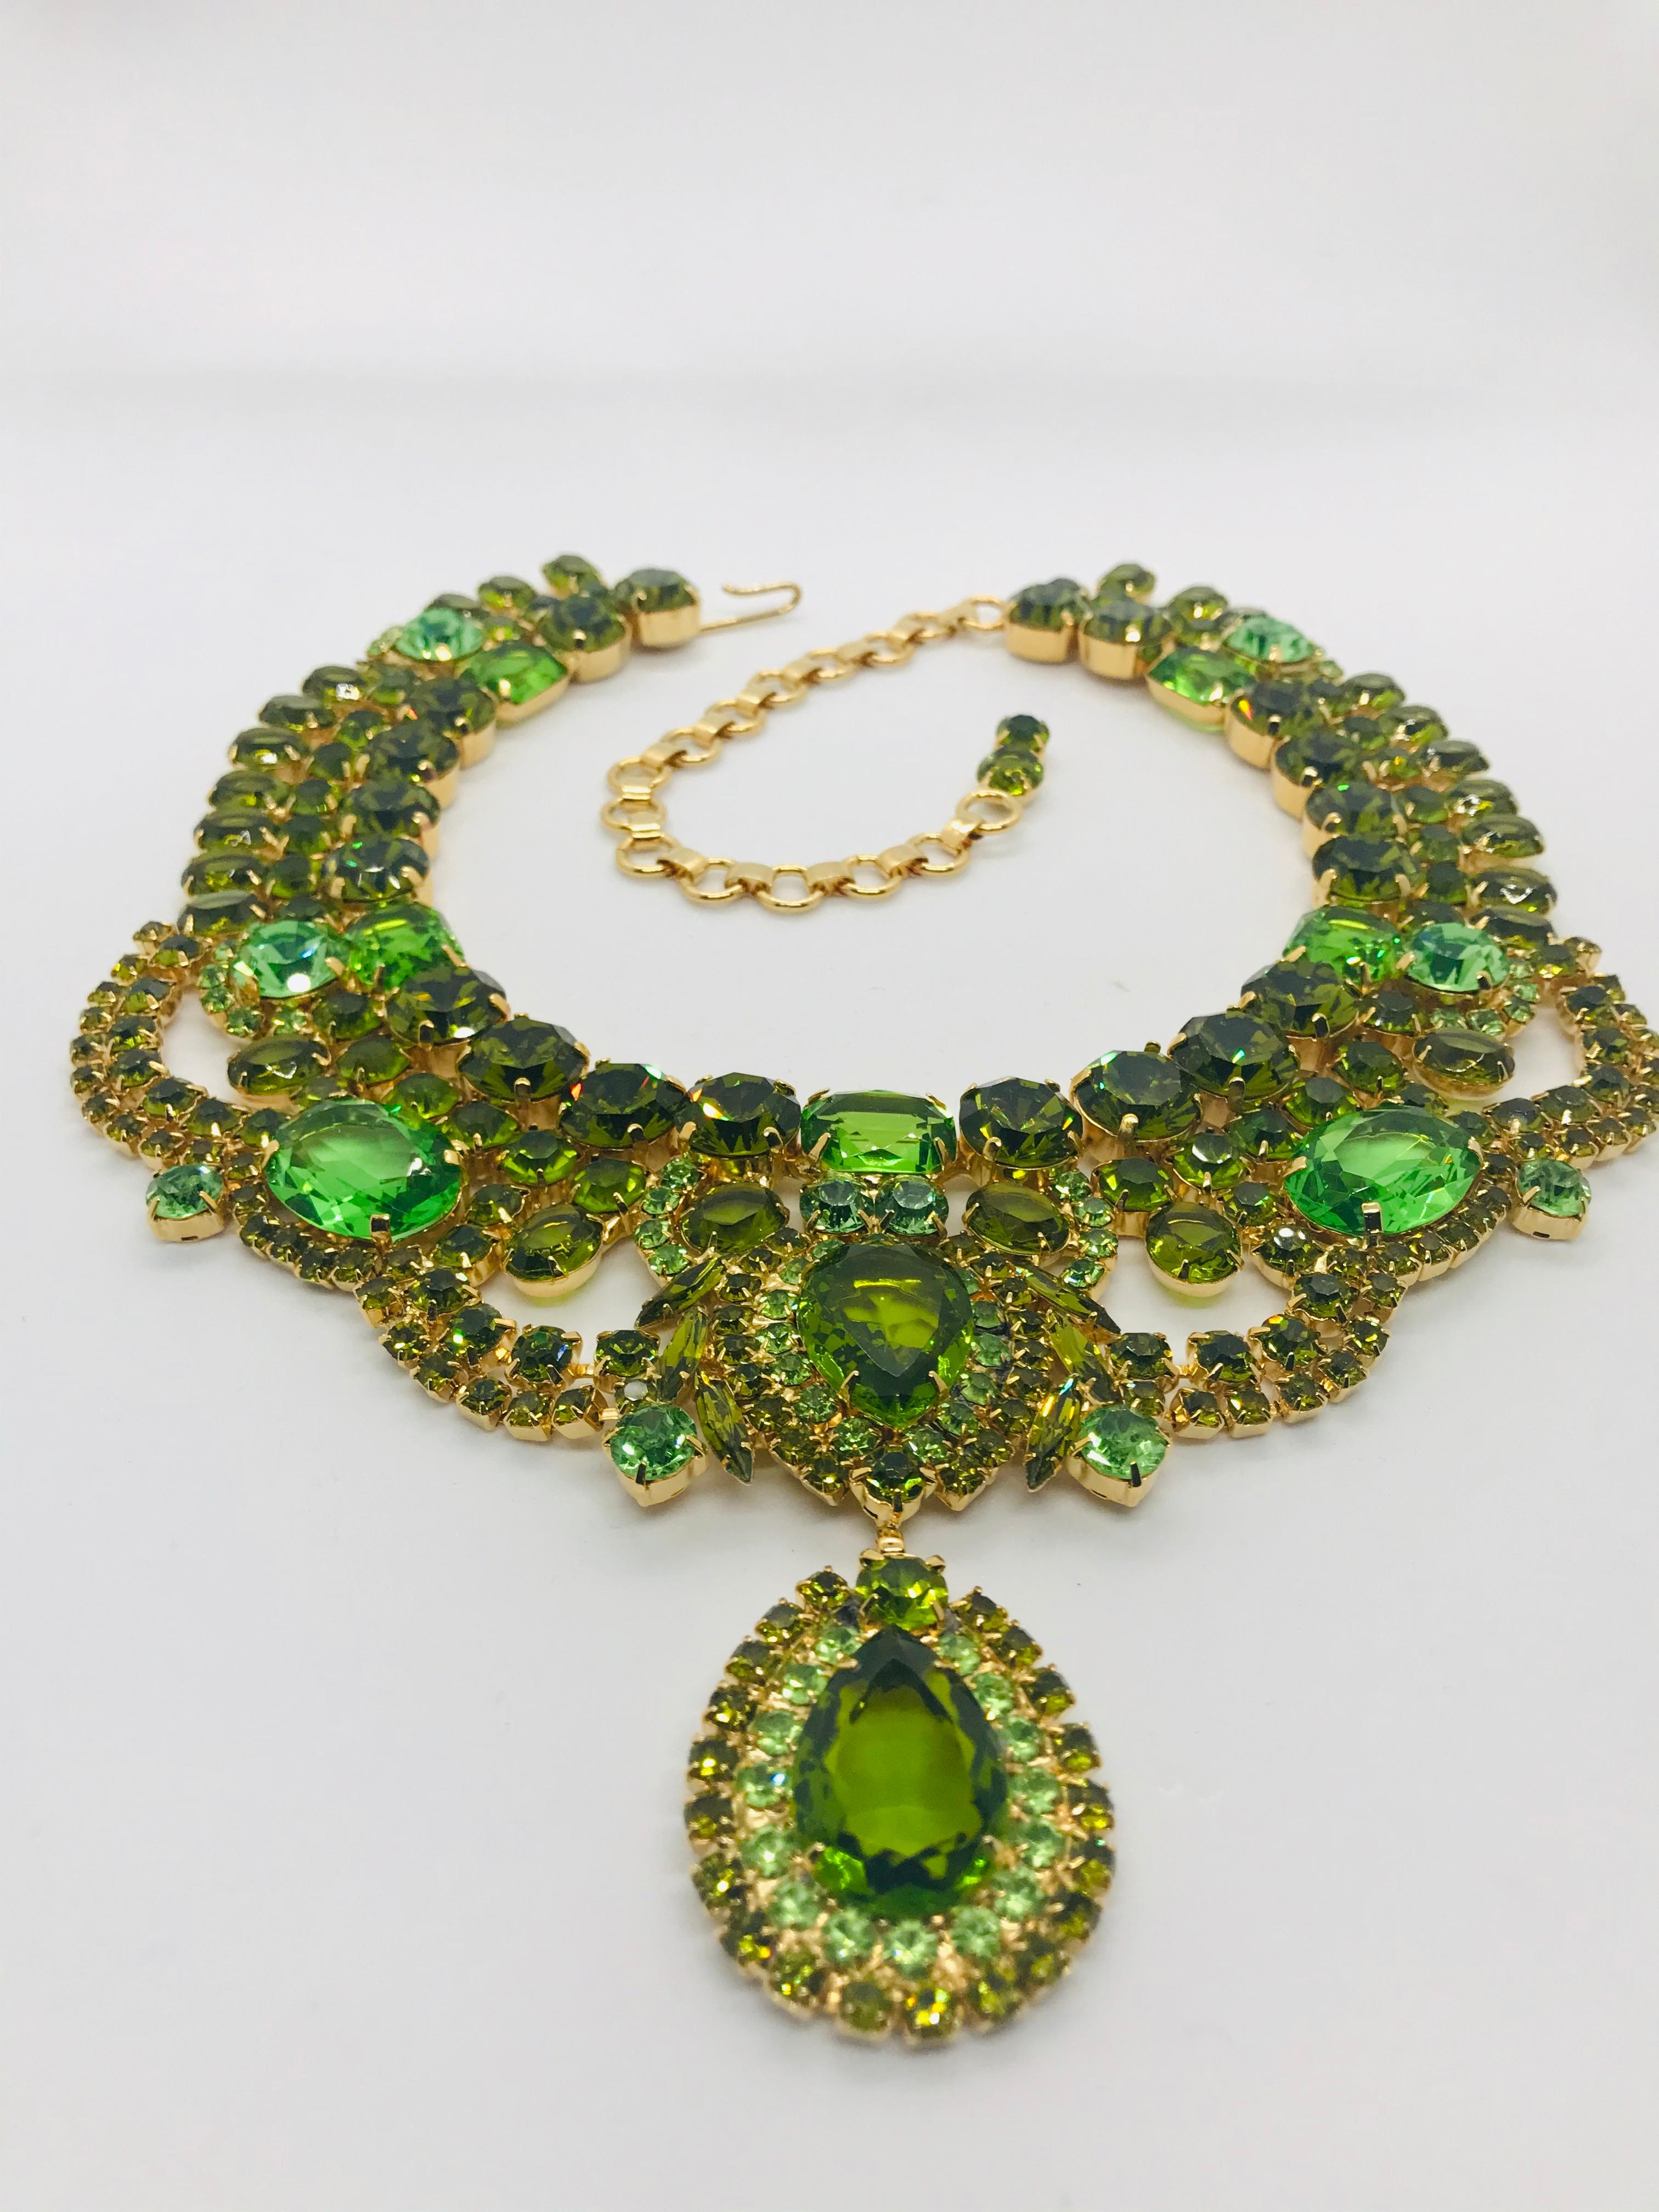 If you like bold tone on tone colour, our peridot and olivine Austrian crystal swag collar necklace is the necklace for you!  The center of the necklace features a pear shaped center drop and several large cushion shaped vintage 1960s Swarovski